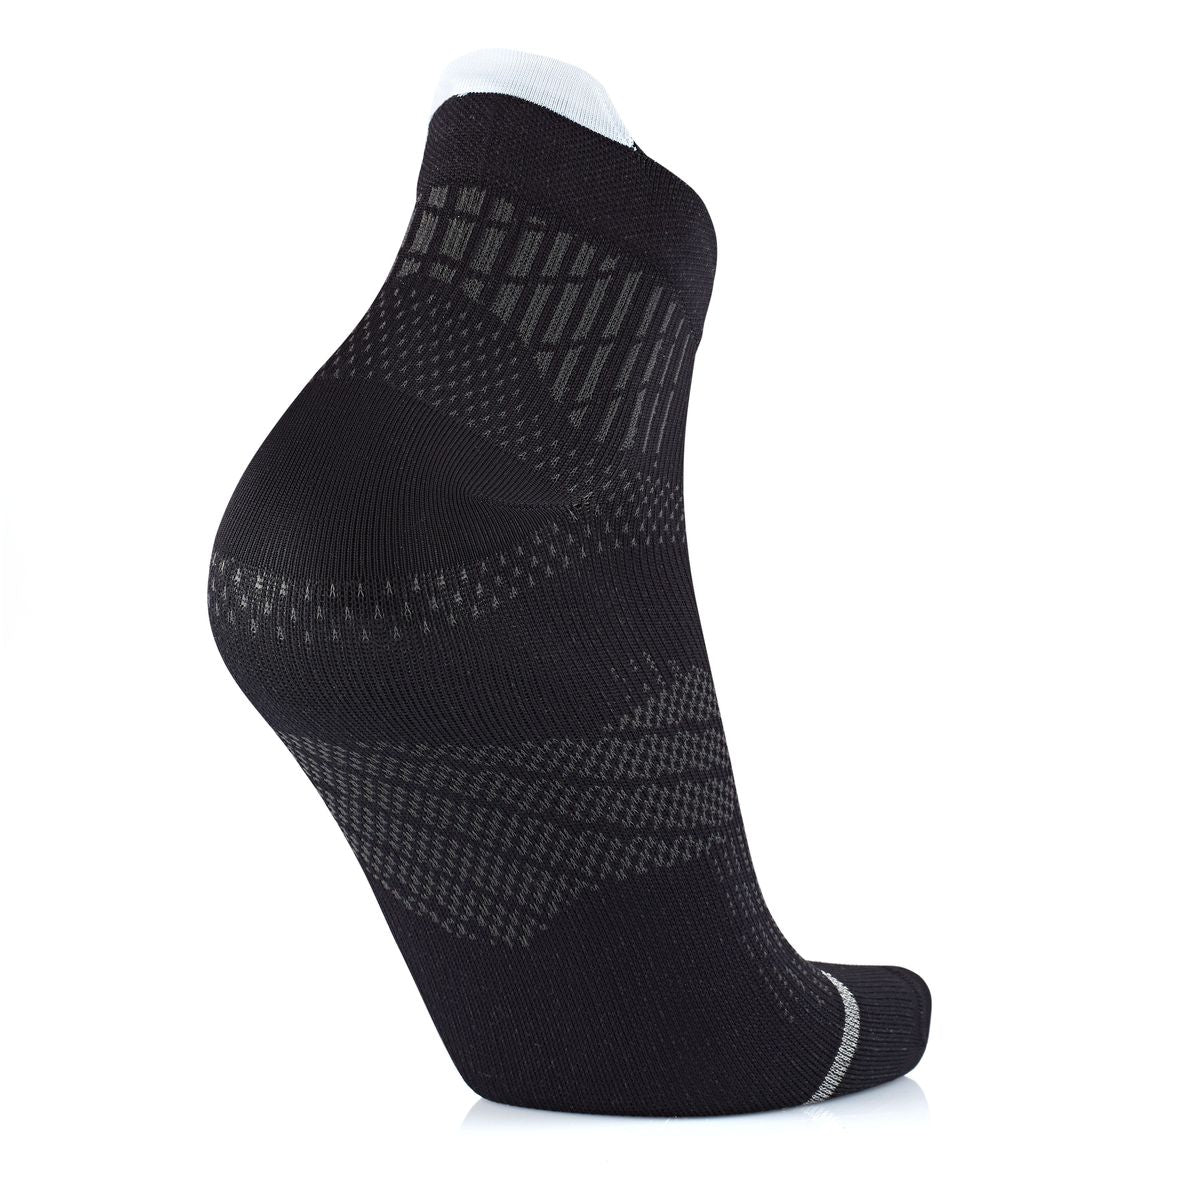 Grip Running Ankle Socks, Compare